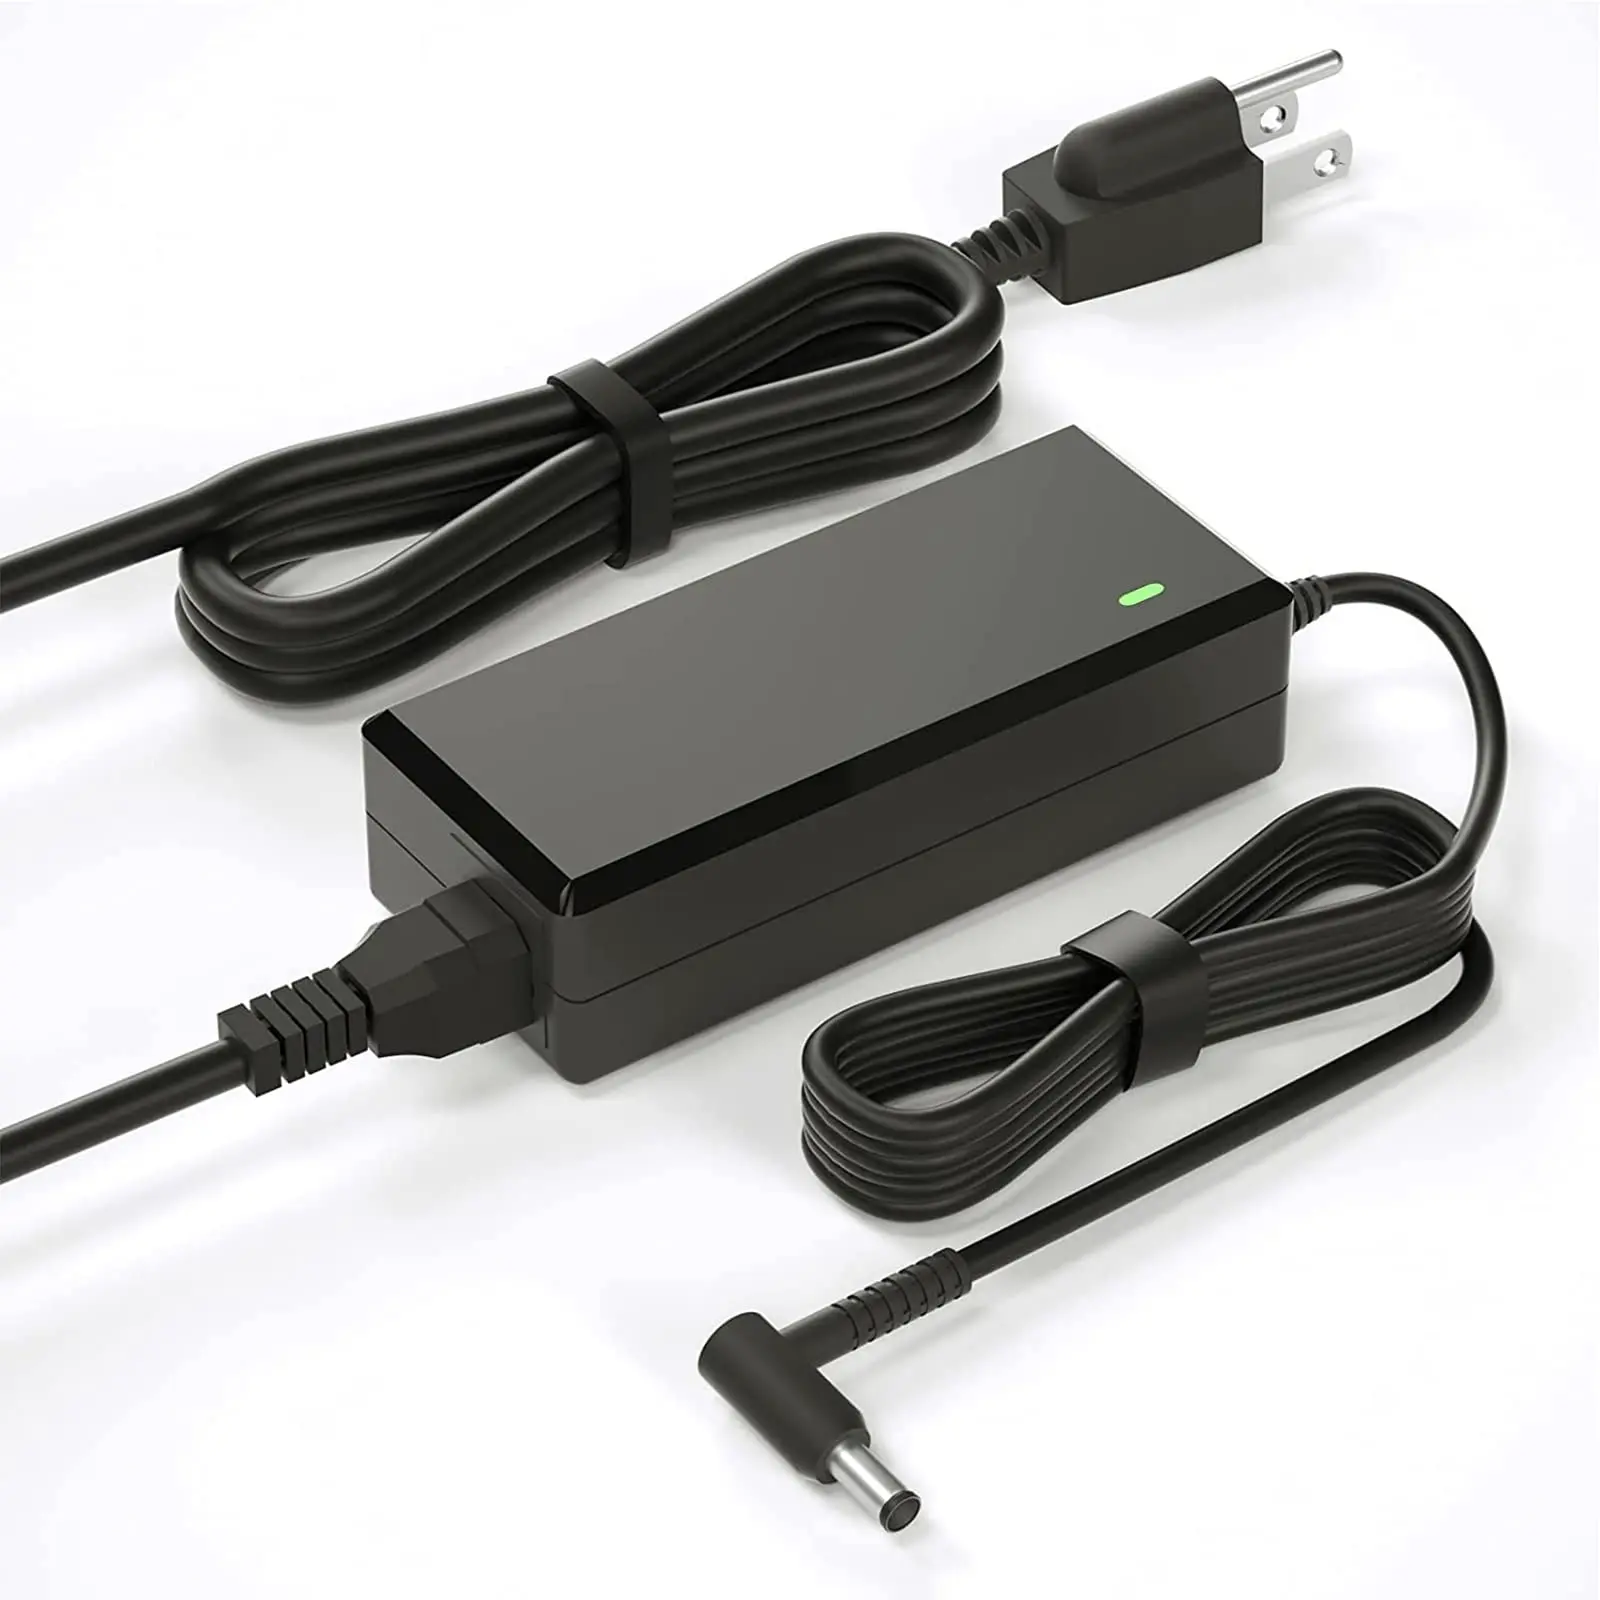 Guide to hewlett-packard monitor cords: everything you need to know